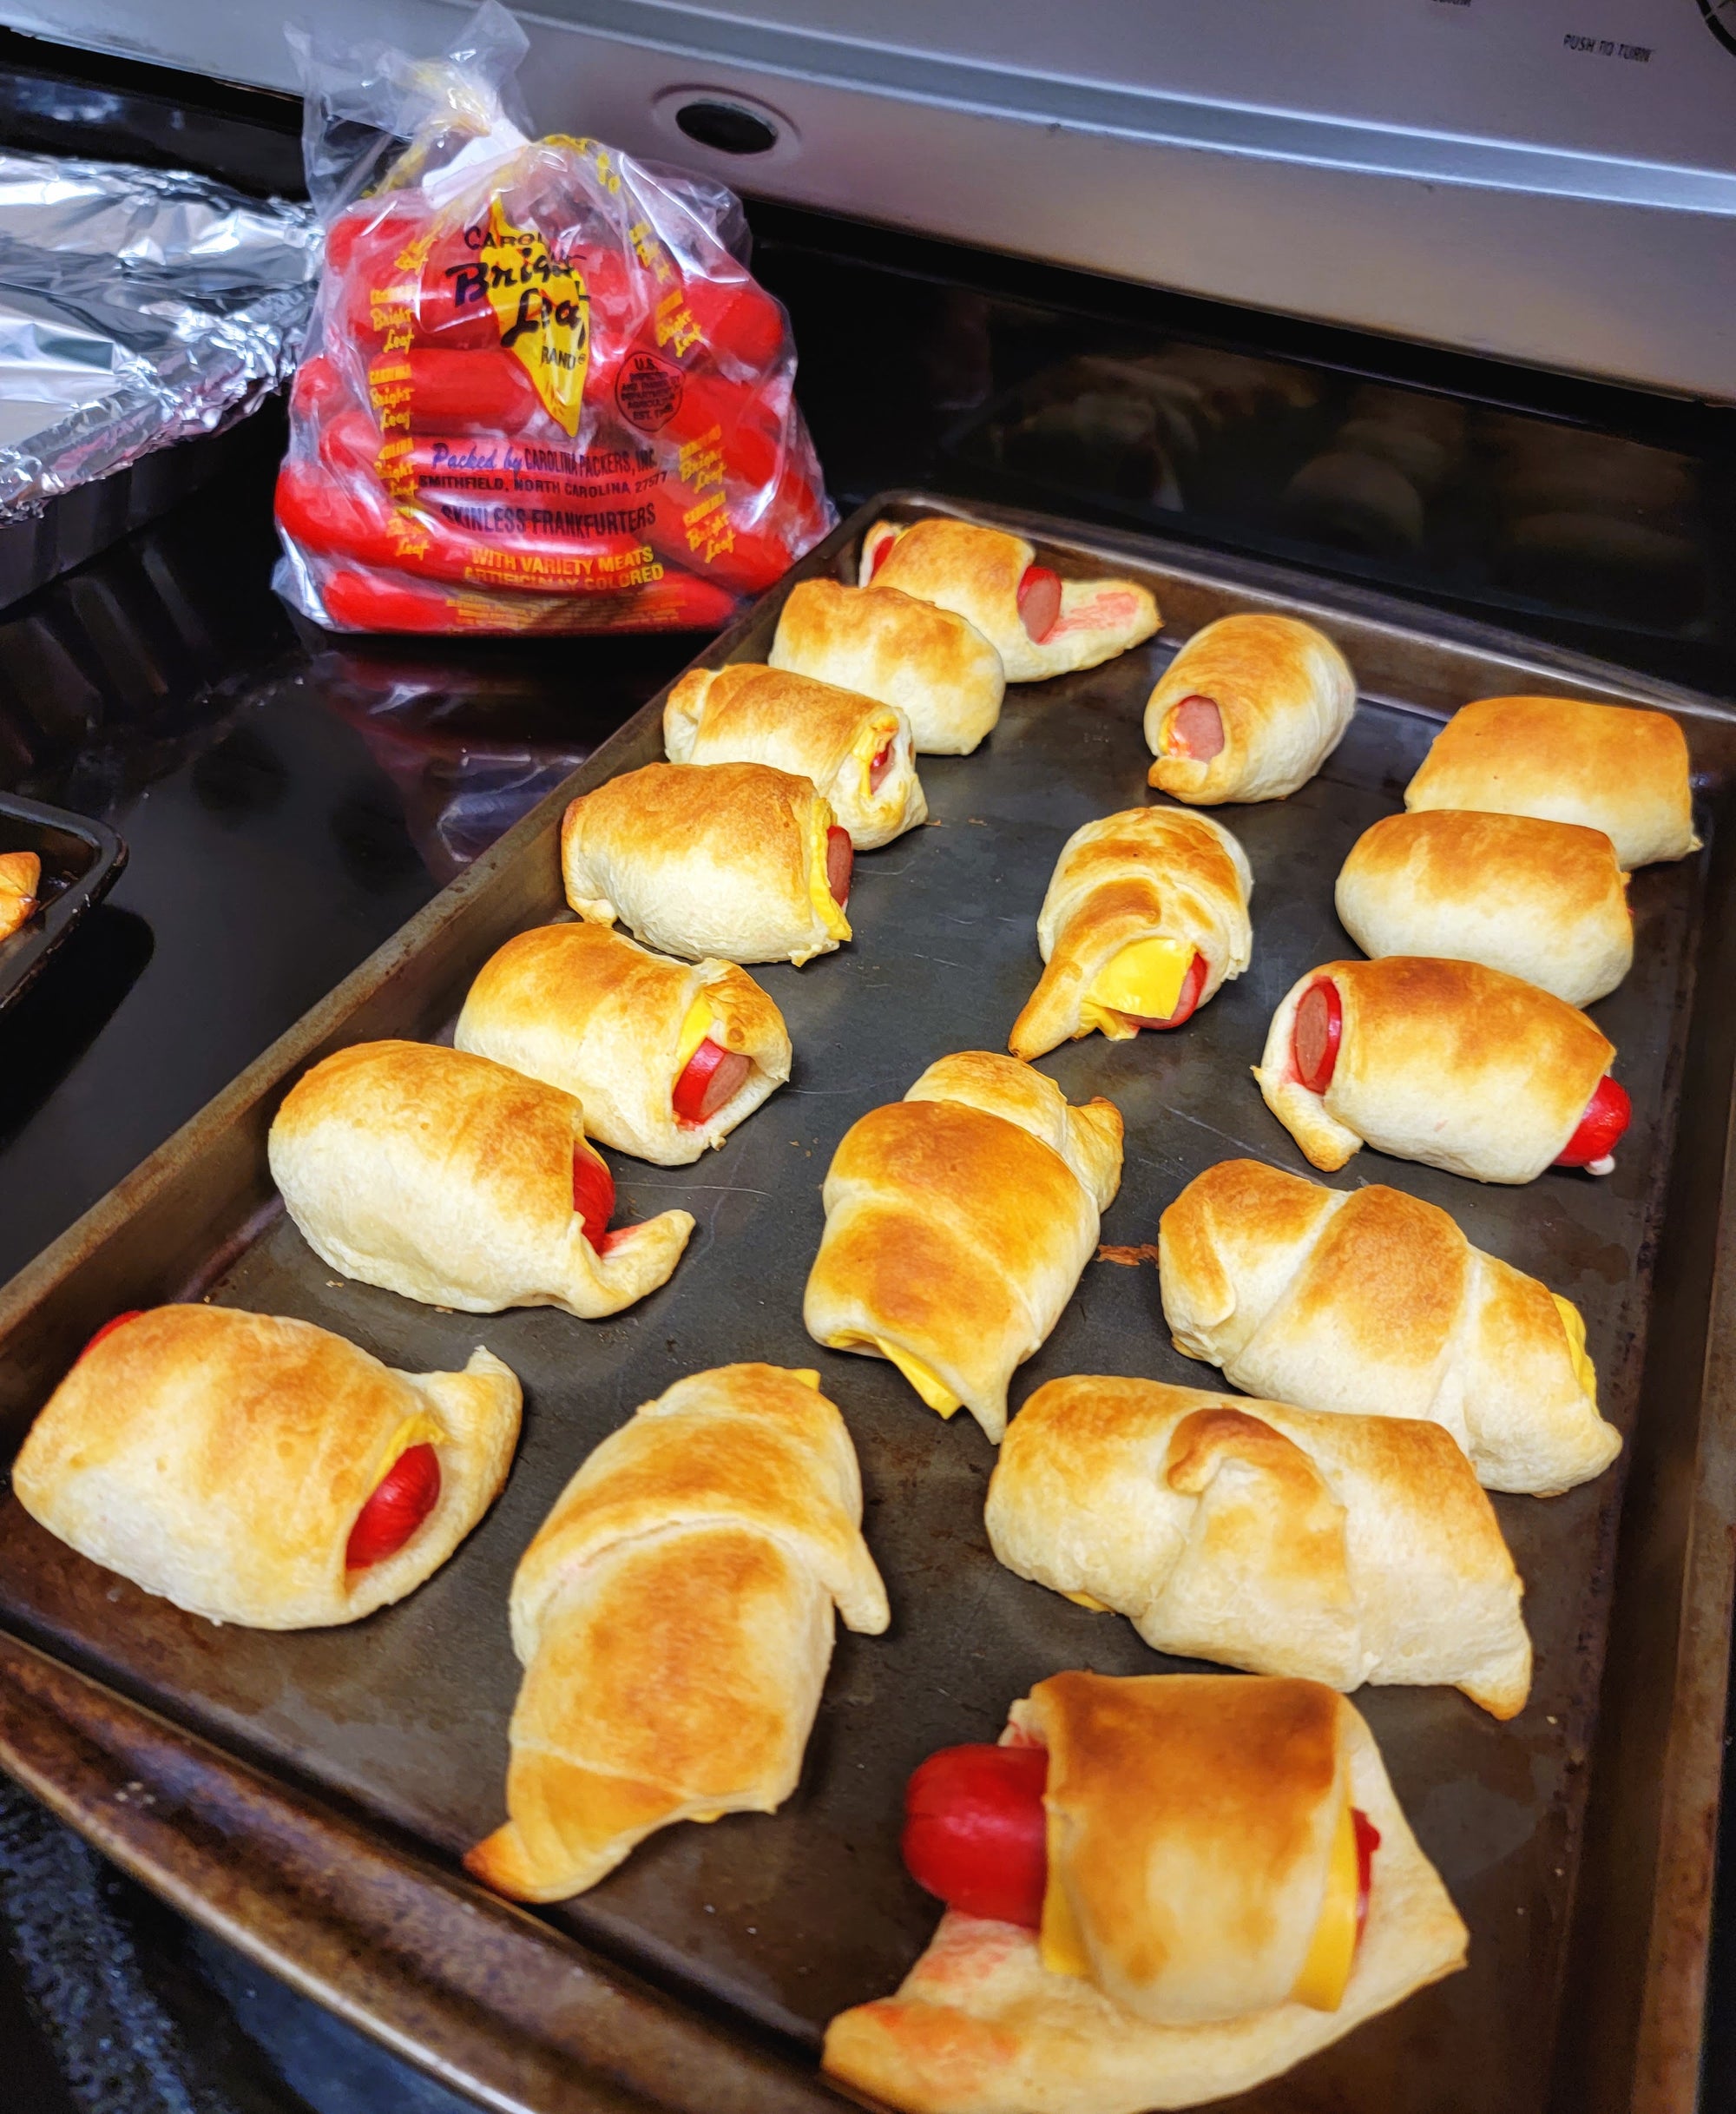 Bright Leaf Hot Dogs in a Blanket